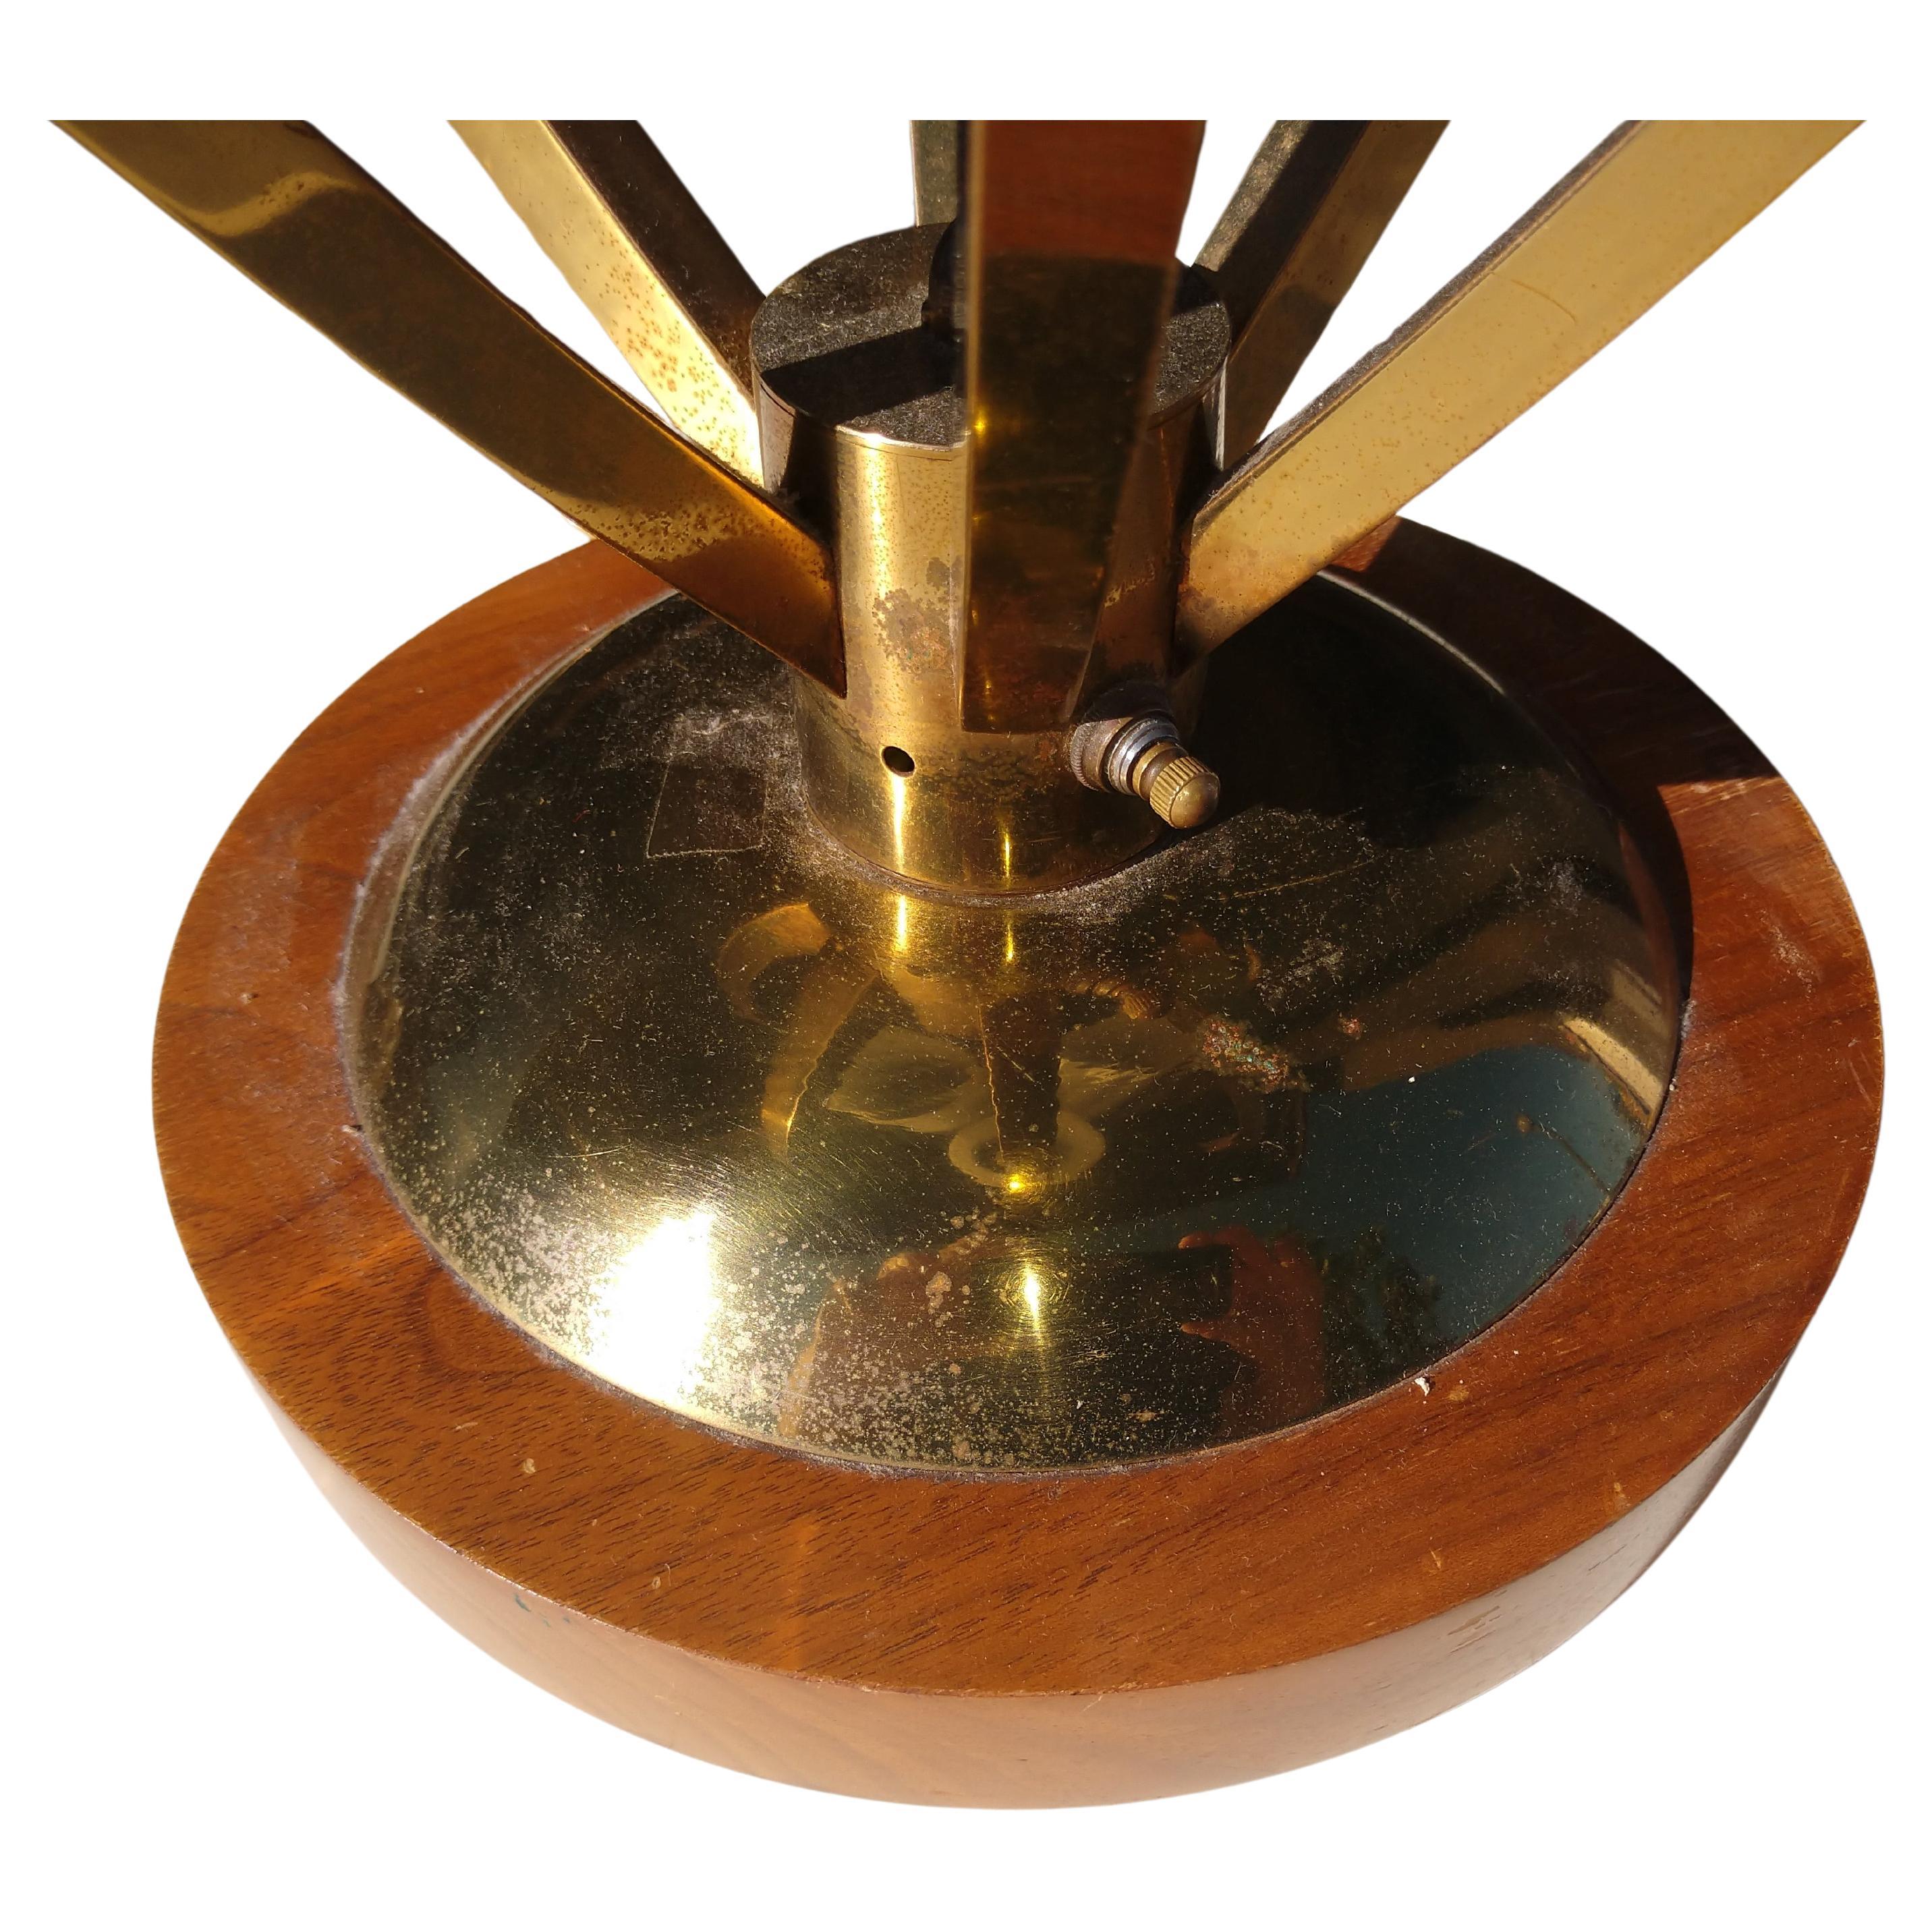 Fabulous 3 way lamp. Switch provides lighting for one, two or all three shades to be lit simultaneously. Brass open Ovoid like housing with 3 frosted glass shades suspended by brass rods. Shades are hung at 3 different heights. Large piece, 38.5